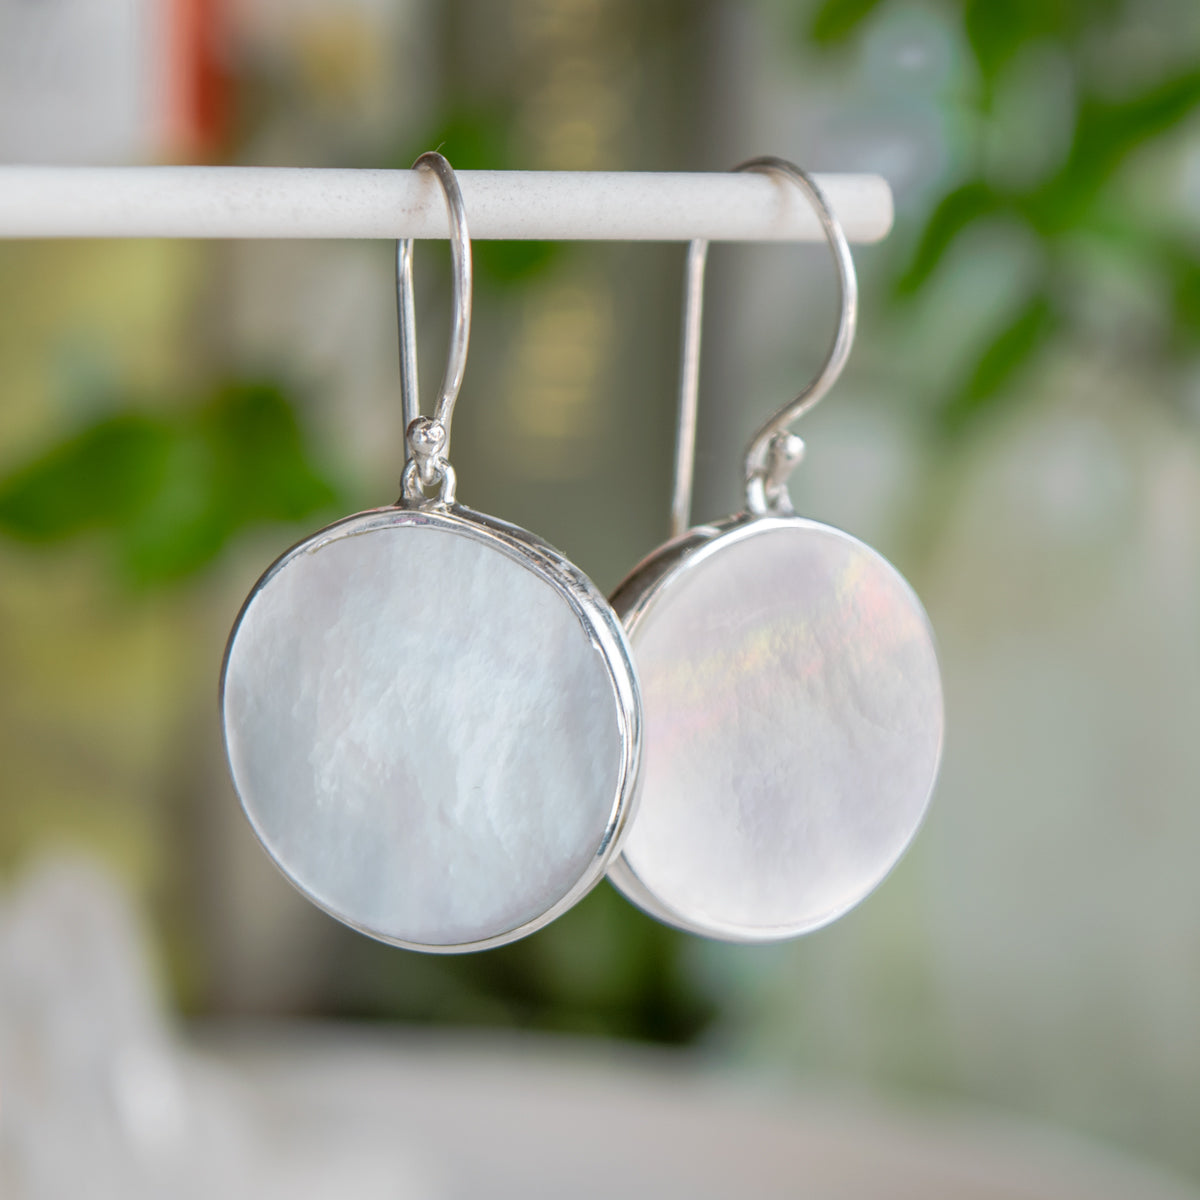 Small white mop earrings round